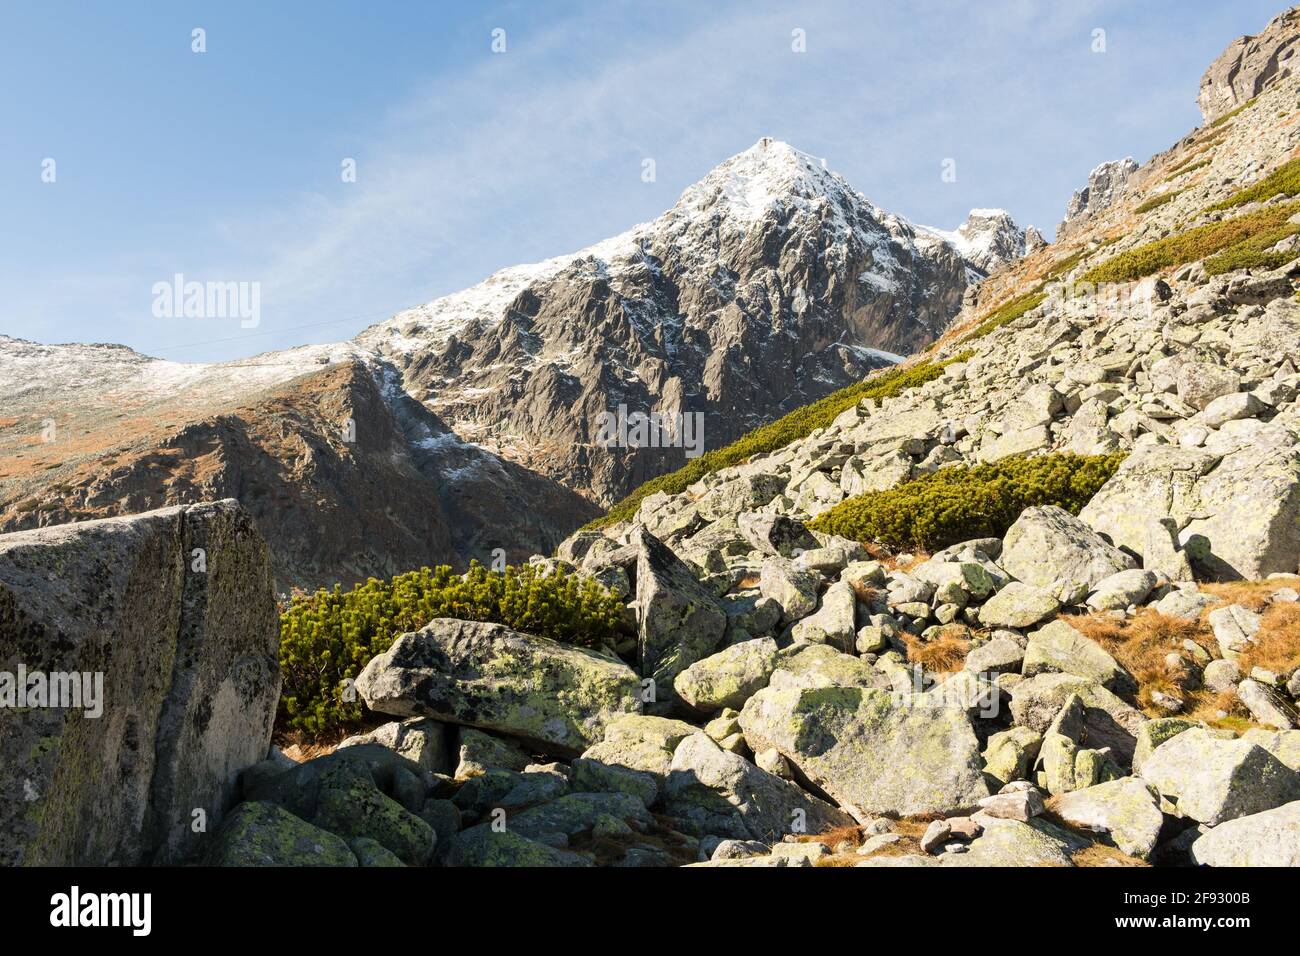 Spiky peaks of the mountain range on a summer day Stock Photo